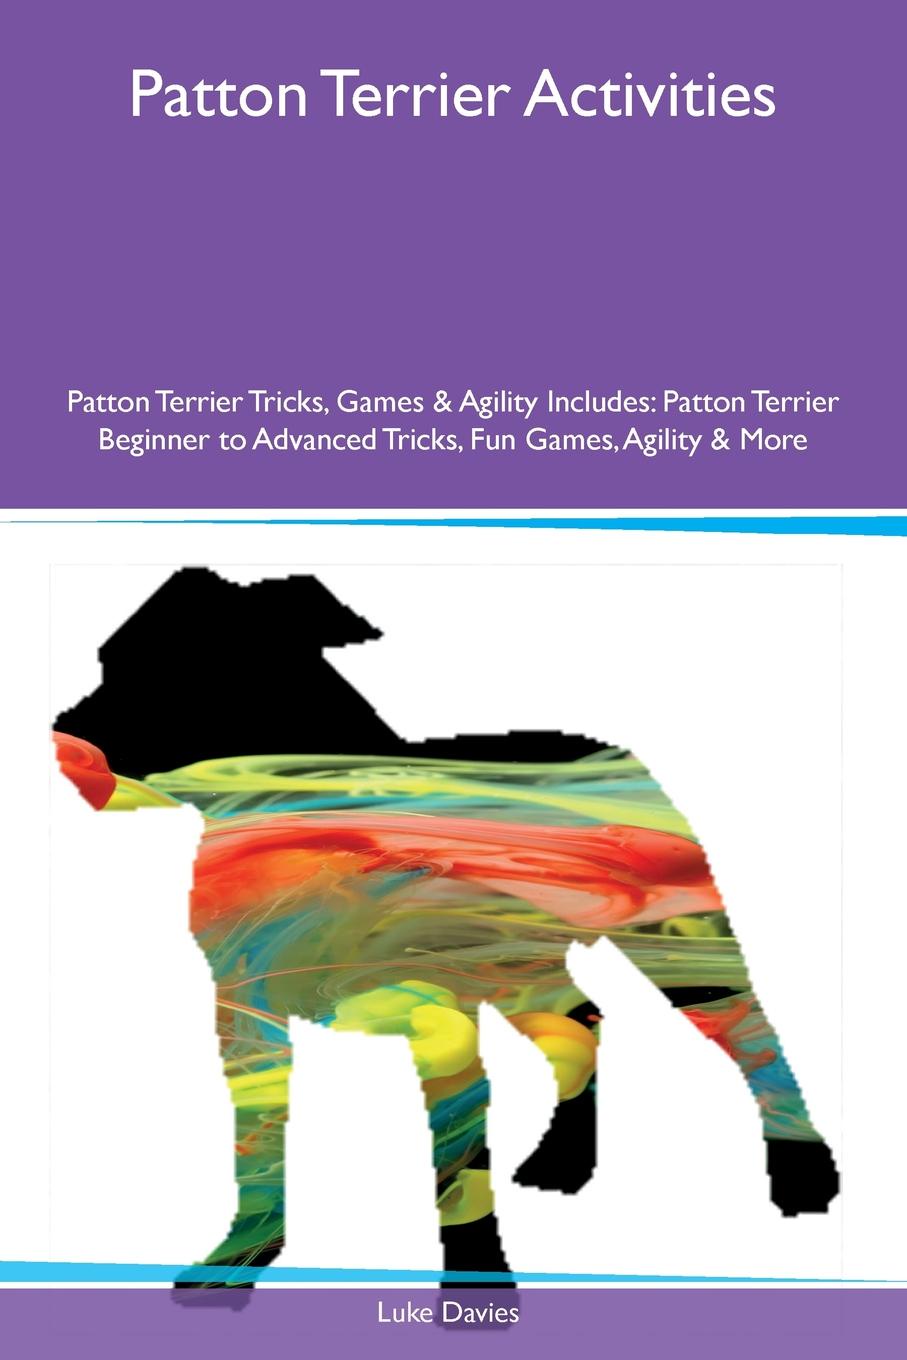 Patton Terrier Activities Patton Terrier Tricks, Games & Agility Includes. Patton Terrier Beginner to Advanced Tricks, Fun Games, Agility & More